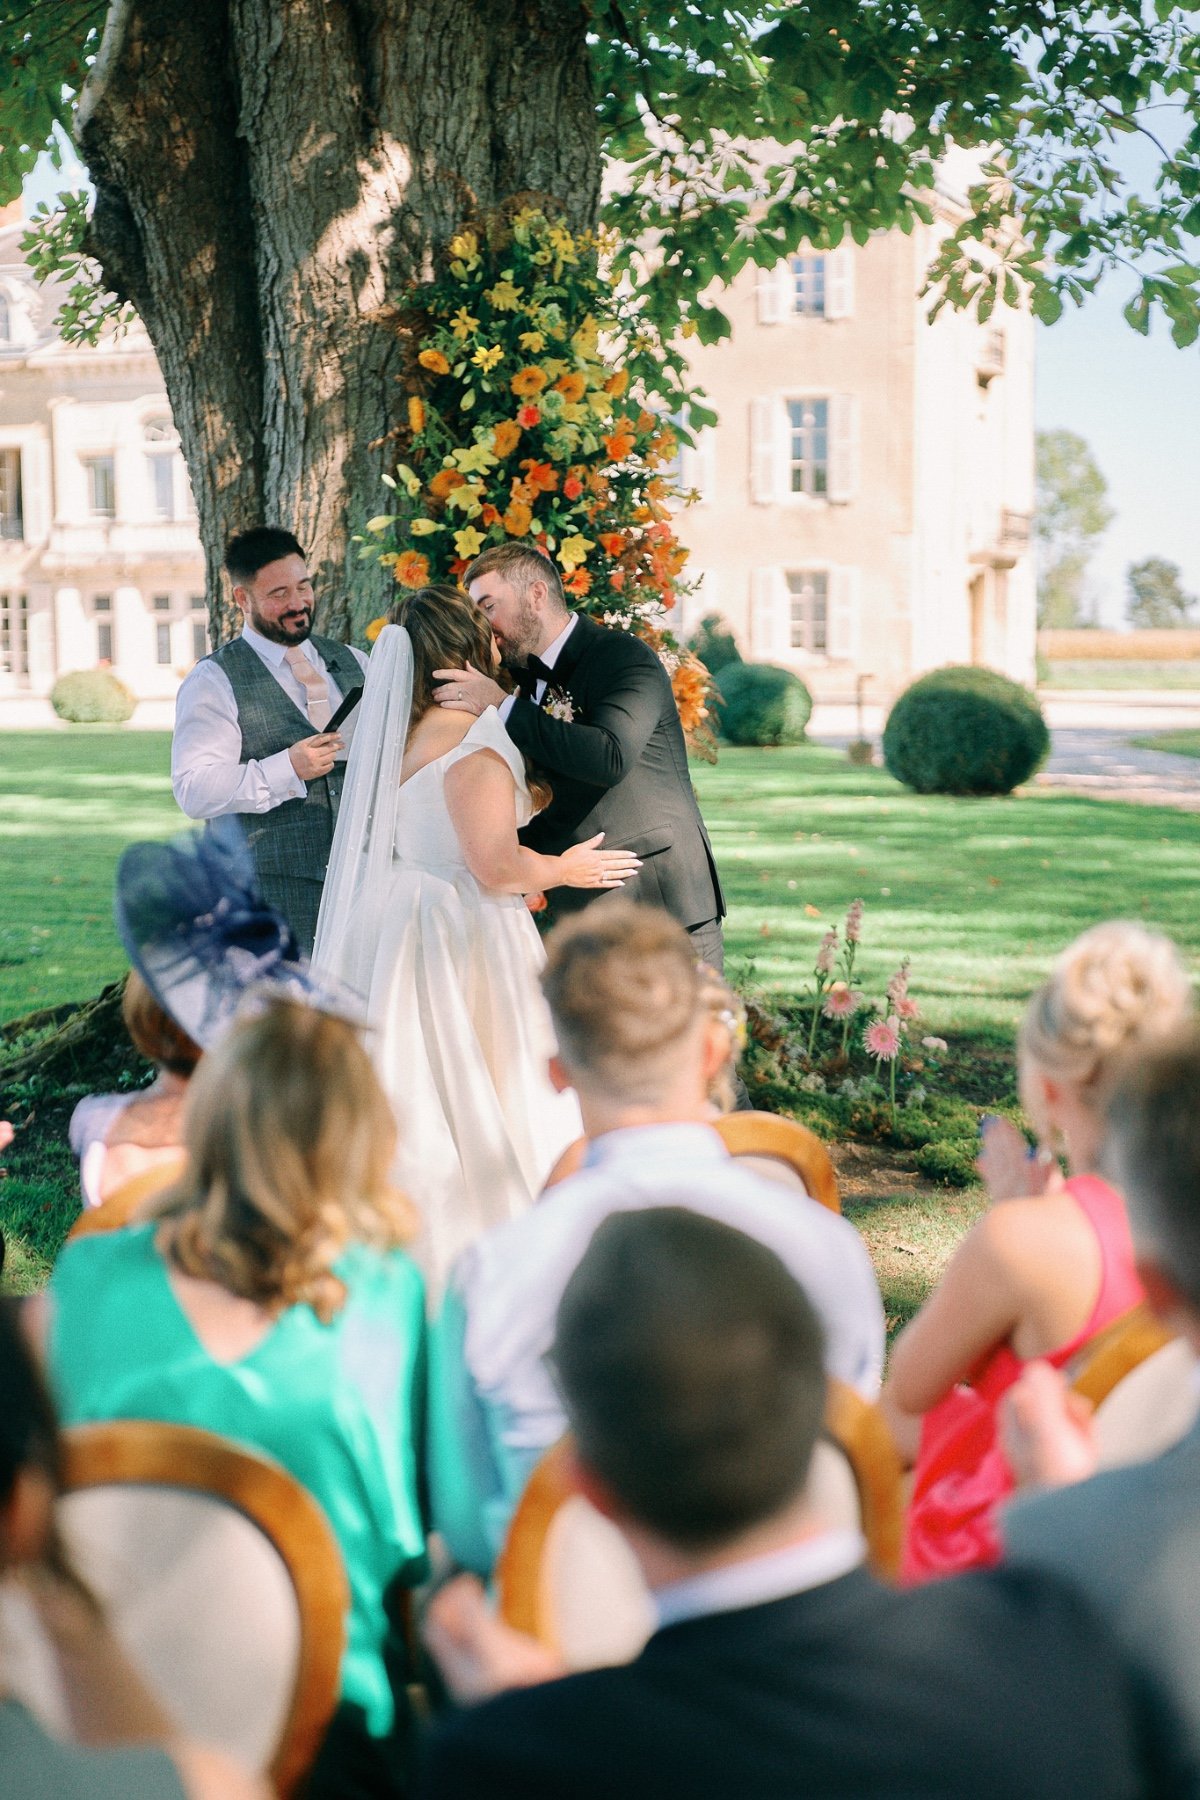 First kiss at French outdoor wedding ceremony